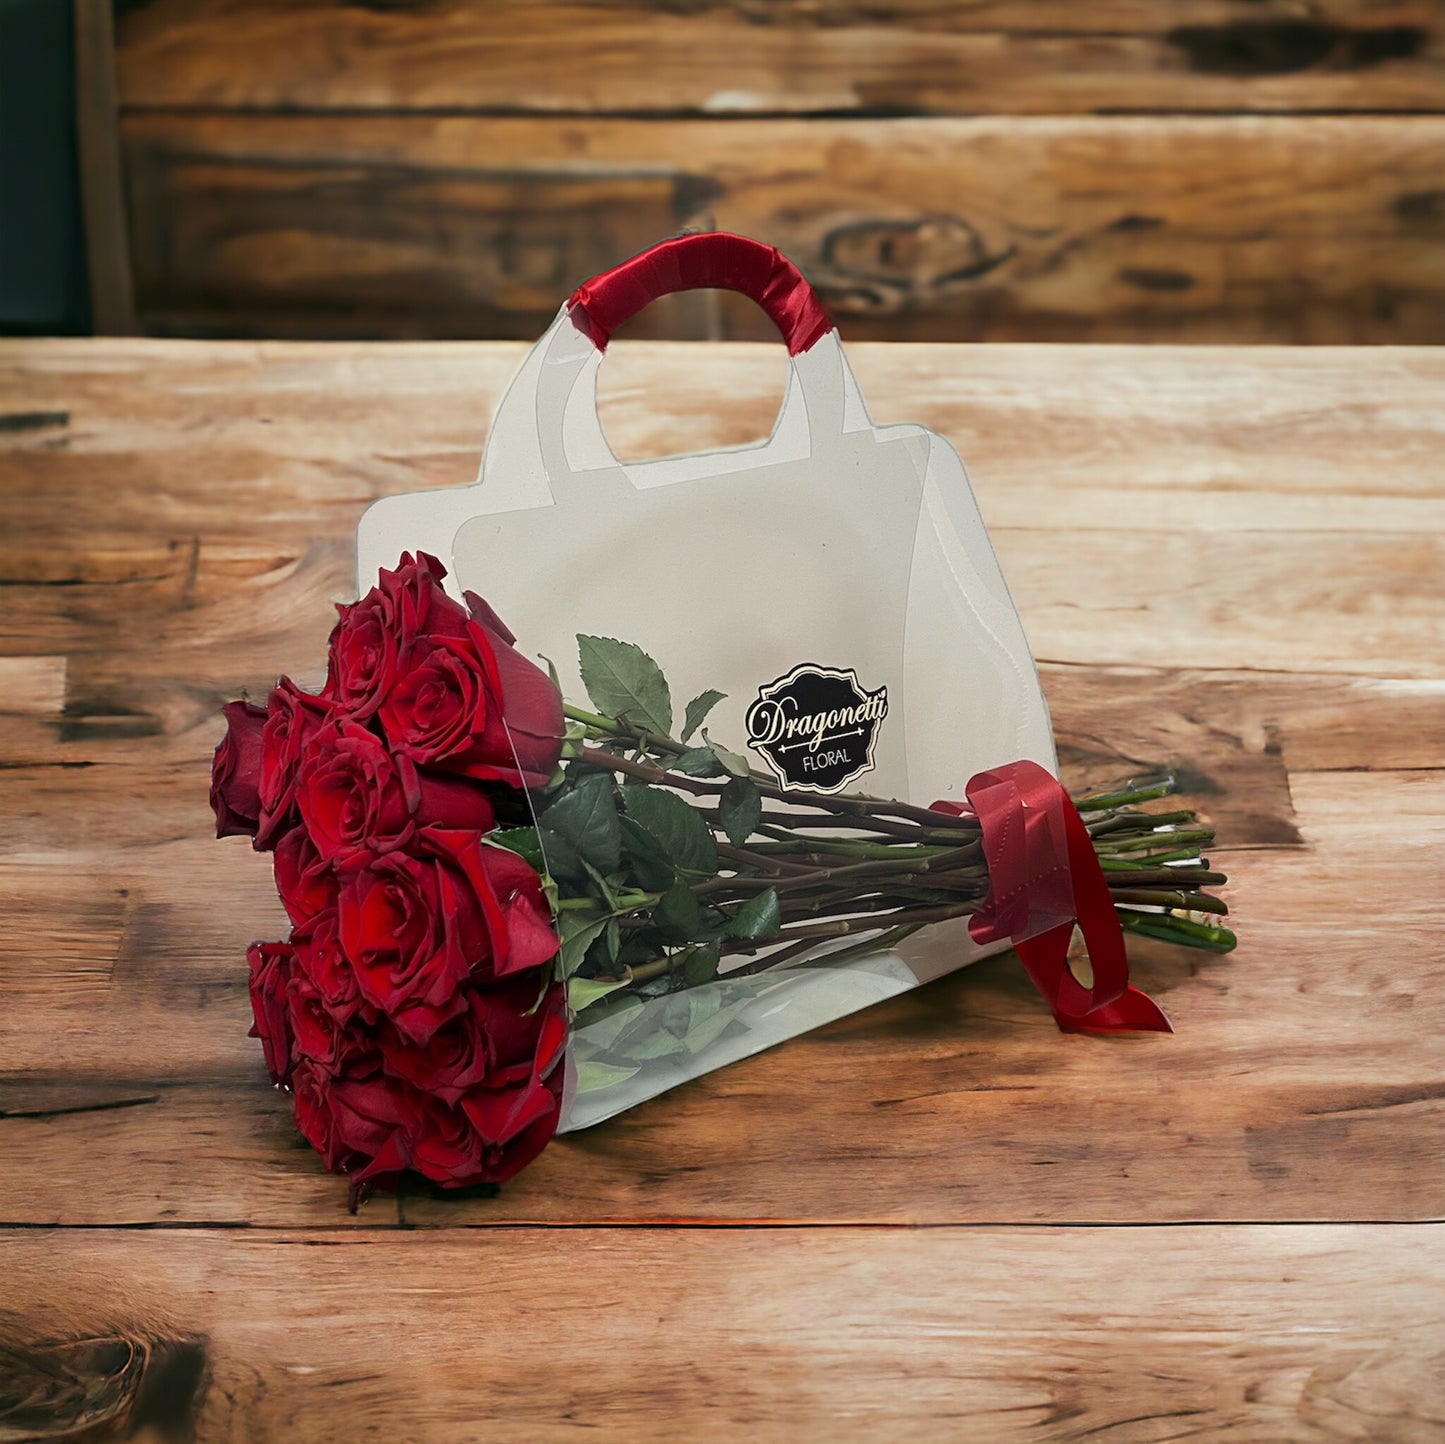 Rose Purse-Unique rose purse bouquet for a stylish anniversary gift